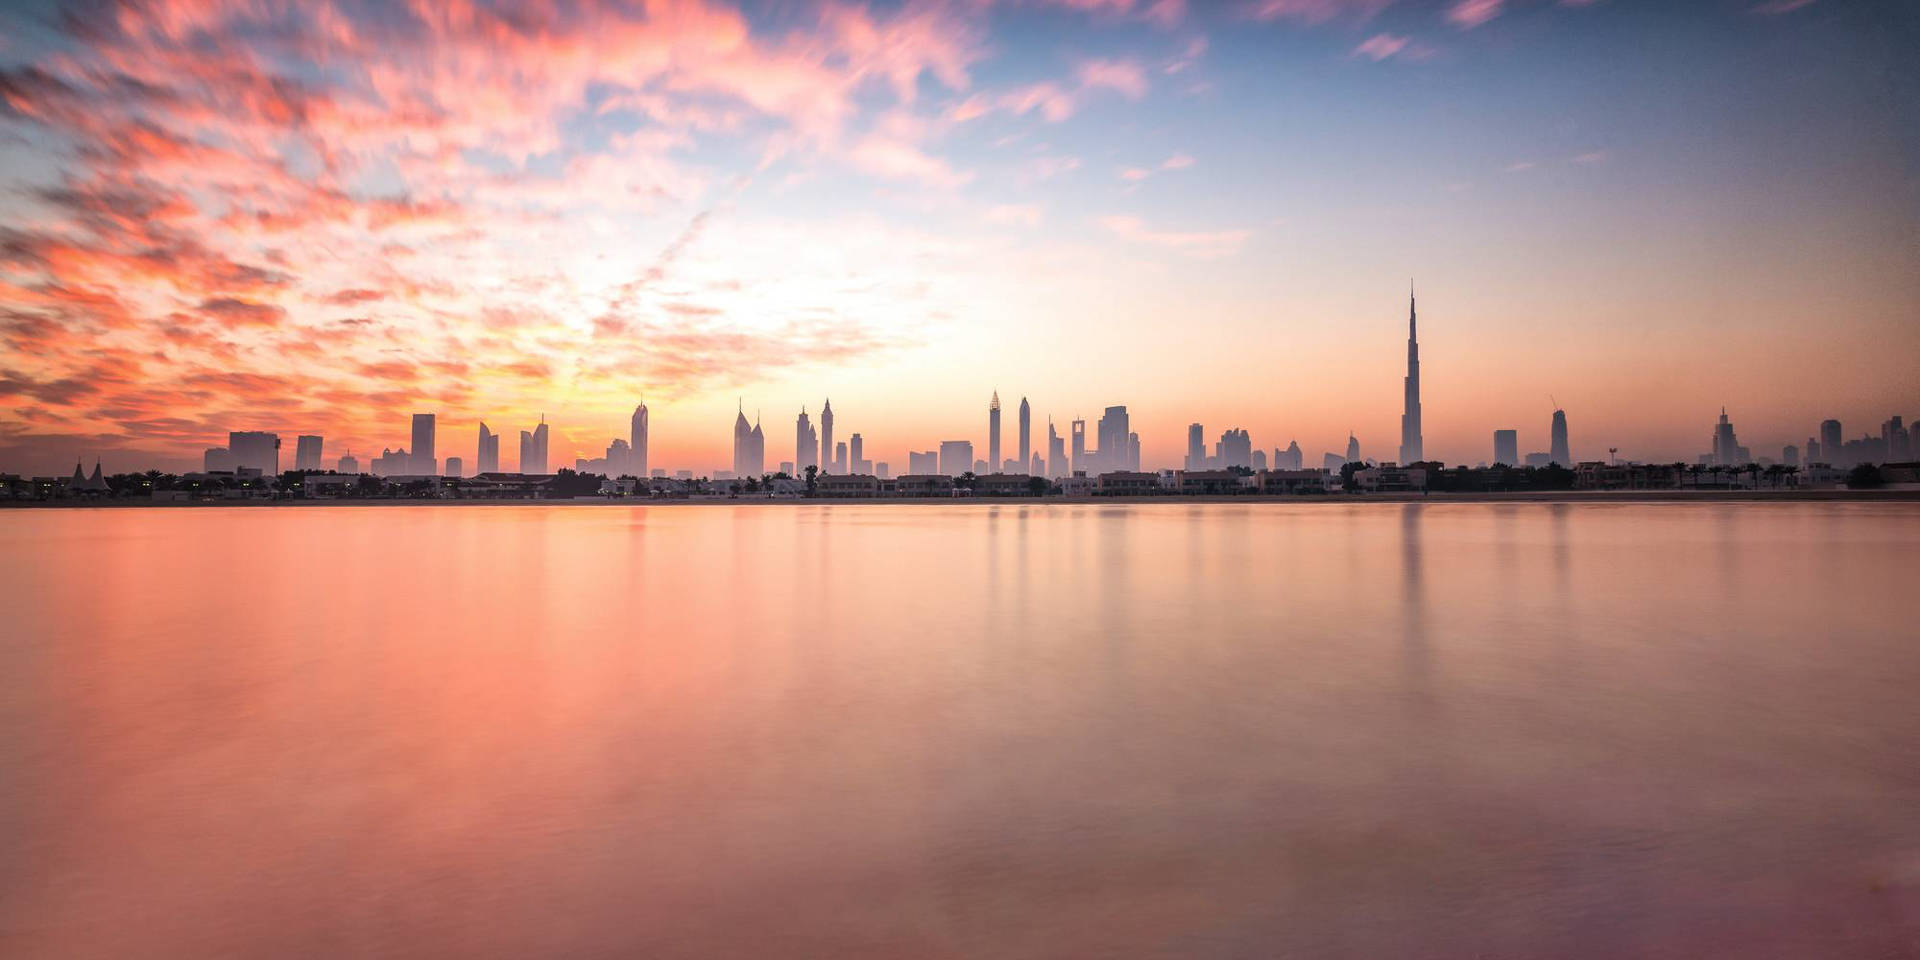 500px Photo ID: 62460025 - I've been through Dubai many times, but never had left the airport. This latest trip I thought I would spend a day in Dubai and venture out to see a bit of the city. I caught this sunrise from Jumeira Beach.